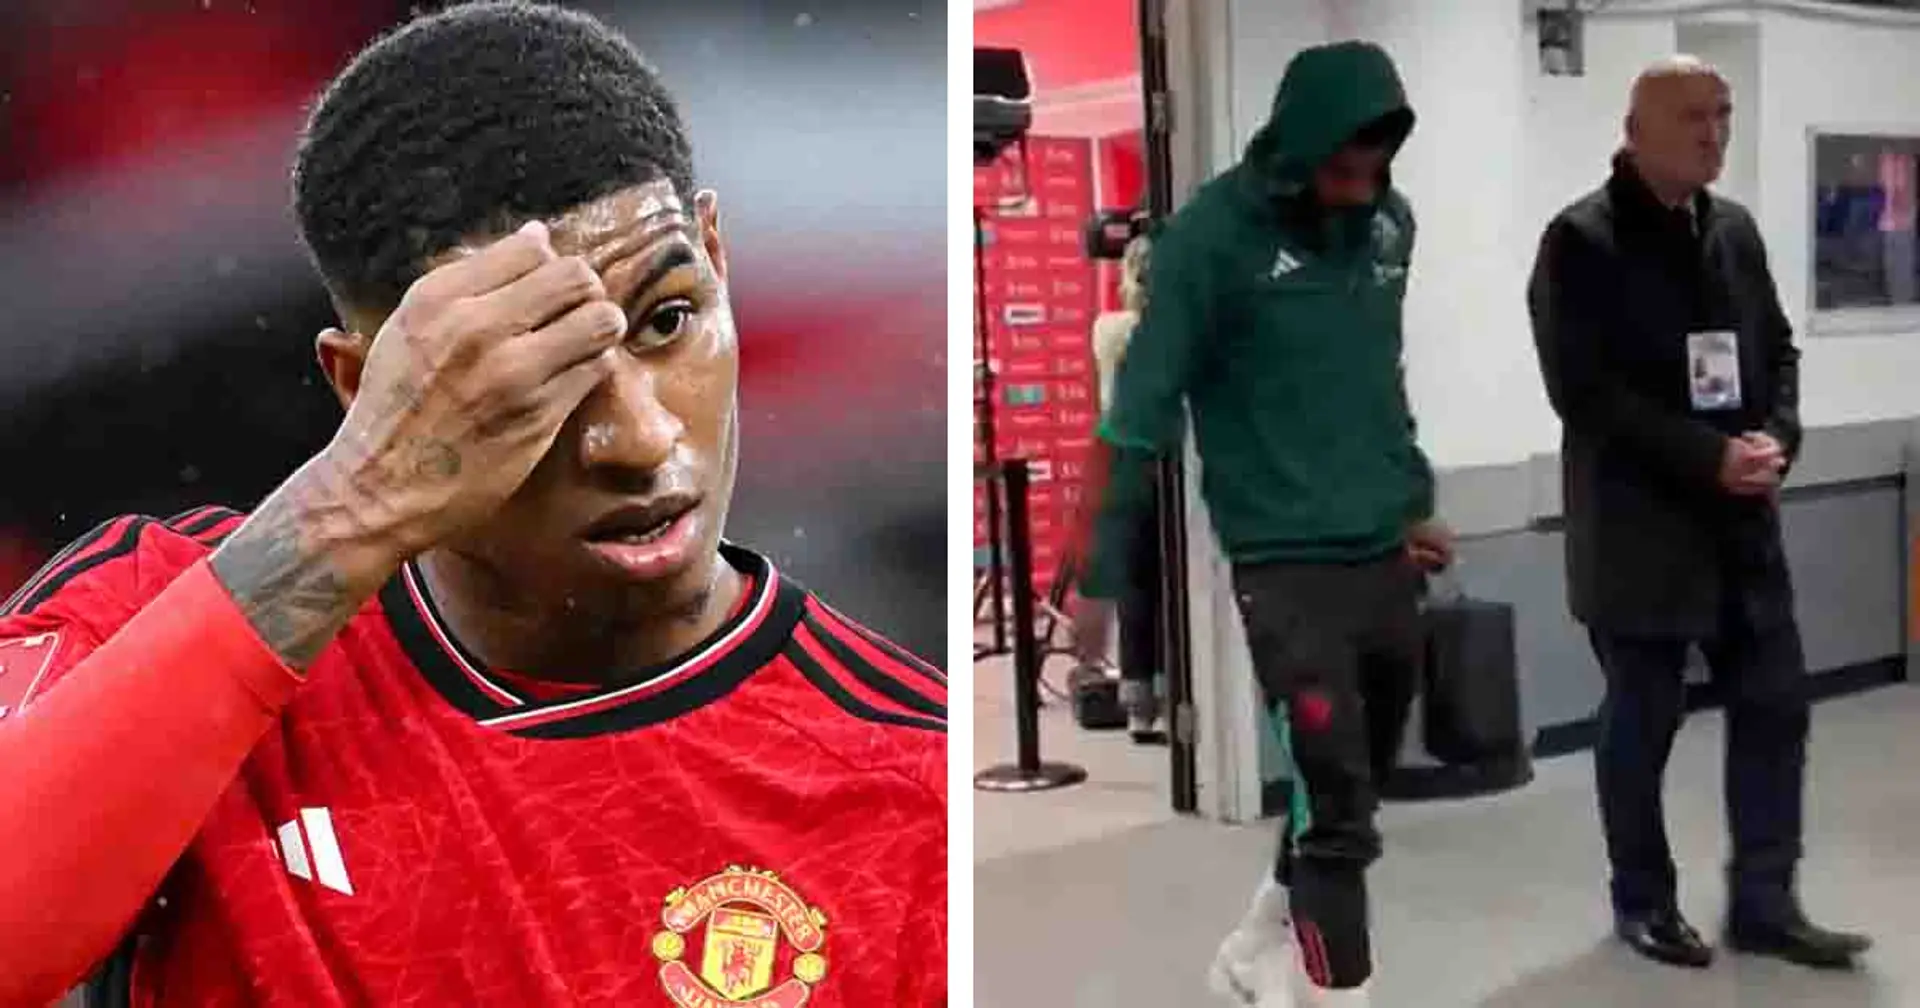 ANOTHER injury blow? Rashford limps out of Wembley Stadium after Coventry win